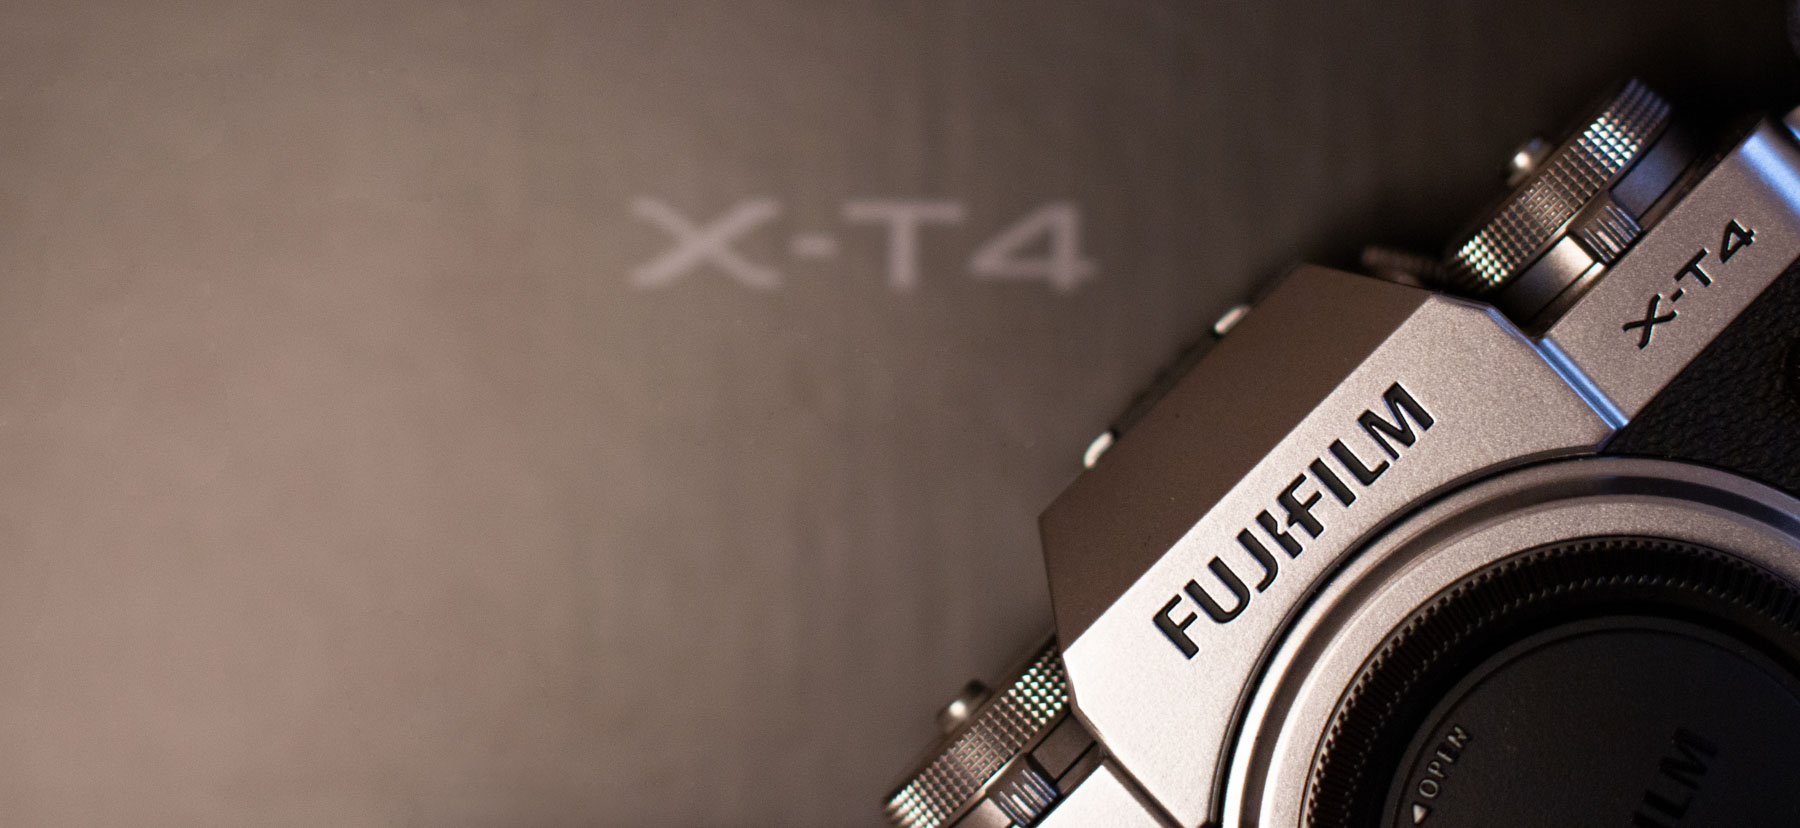 Fujifilm XT-4 product review, how to choose a camera to buy, photography blog